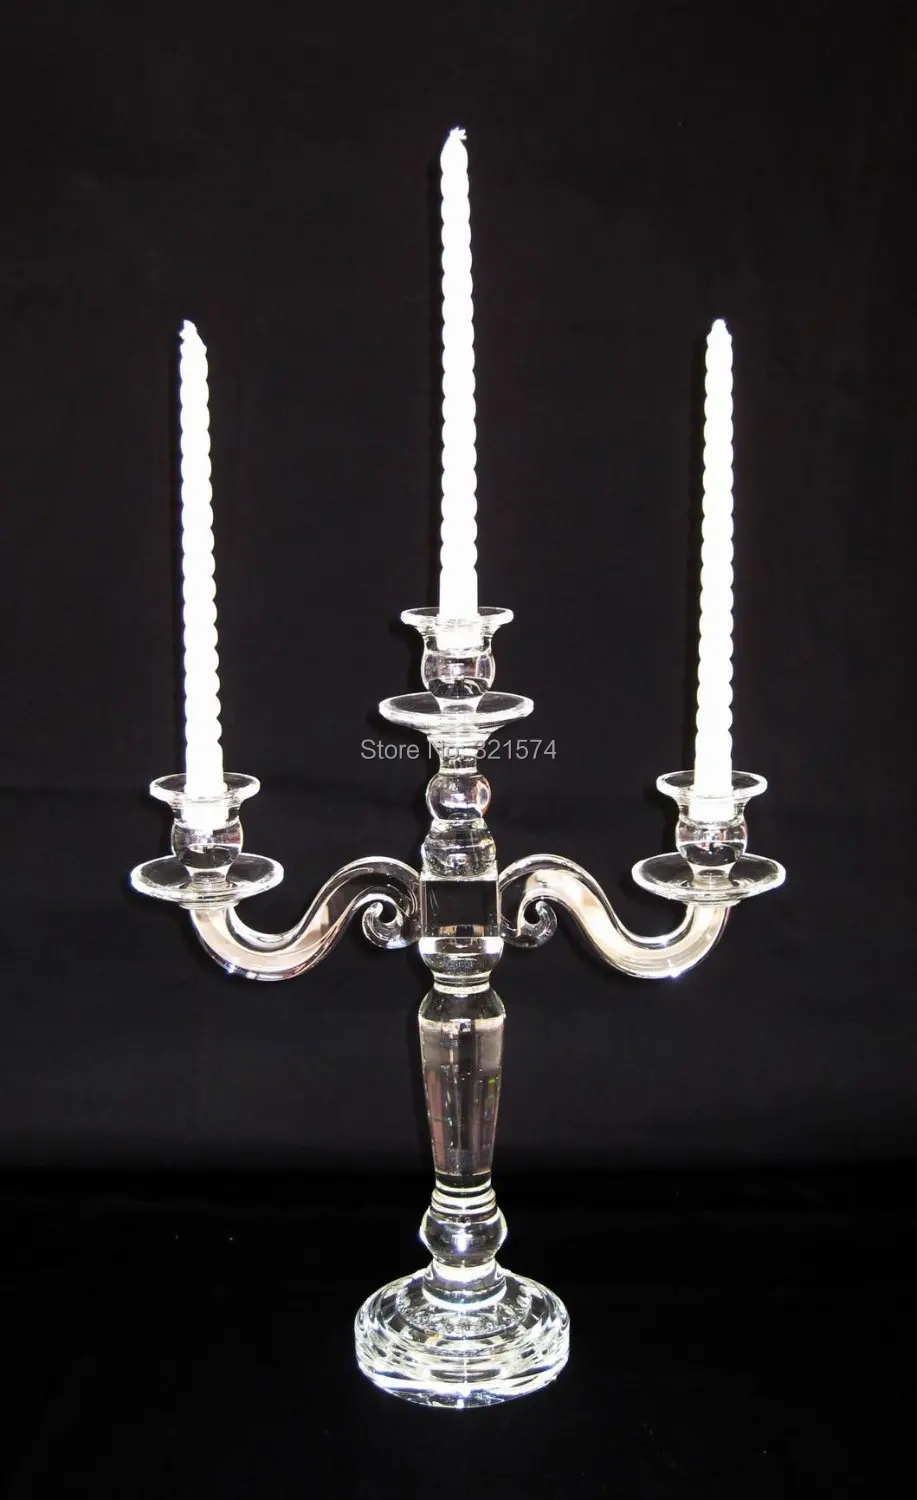 

Romantic K9 Crystal Table Candelabra 3 Arms Candle Holder Wedding Candle Stand Centerpiece Decoration Candlestick